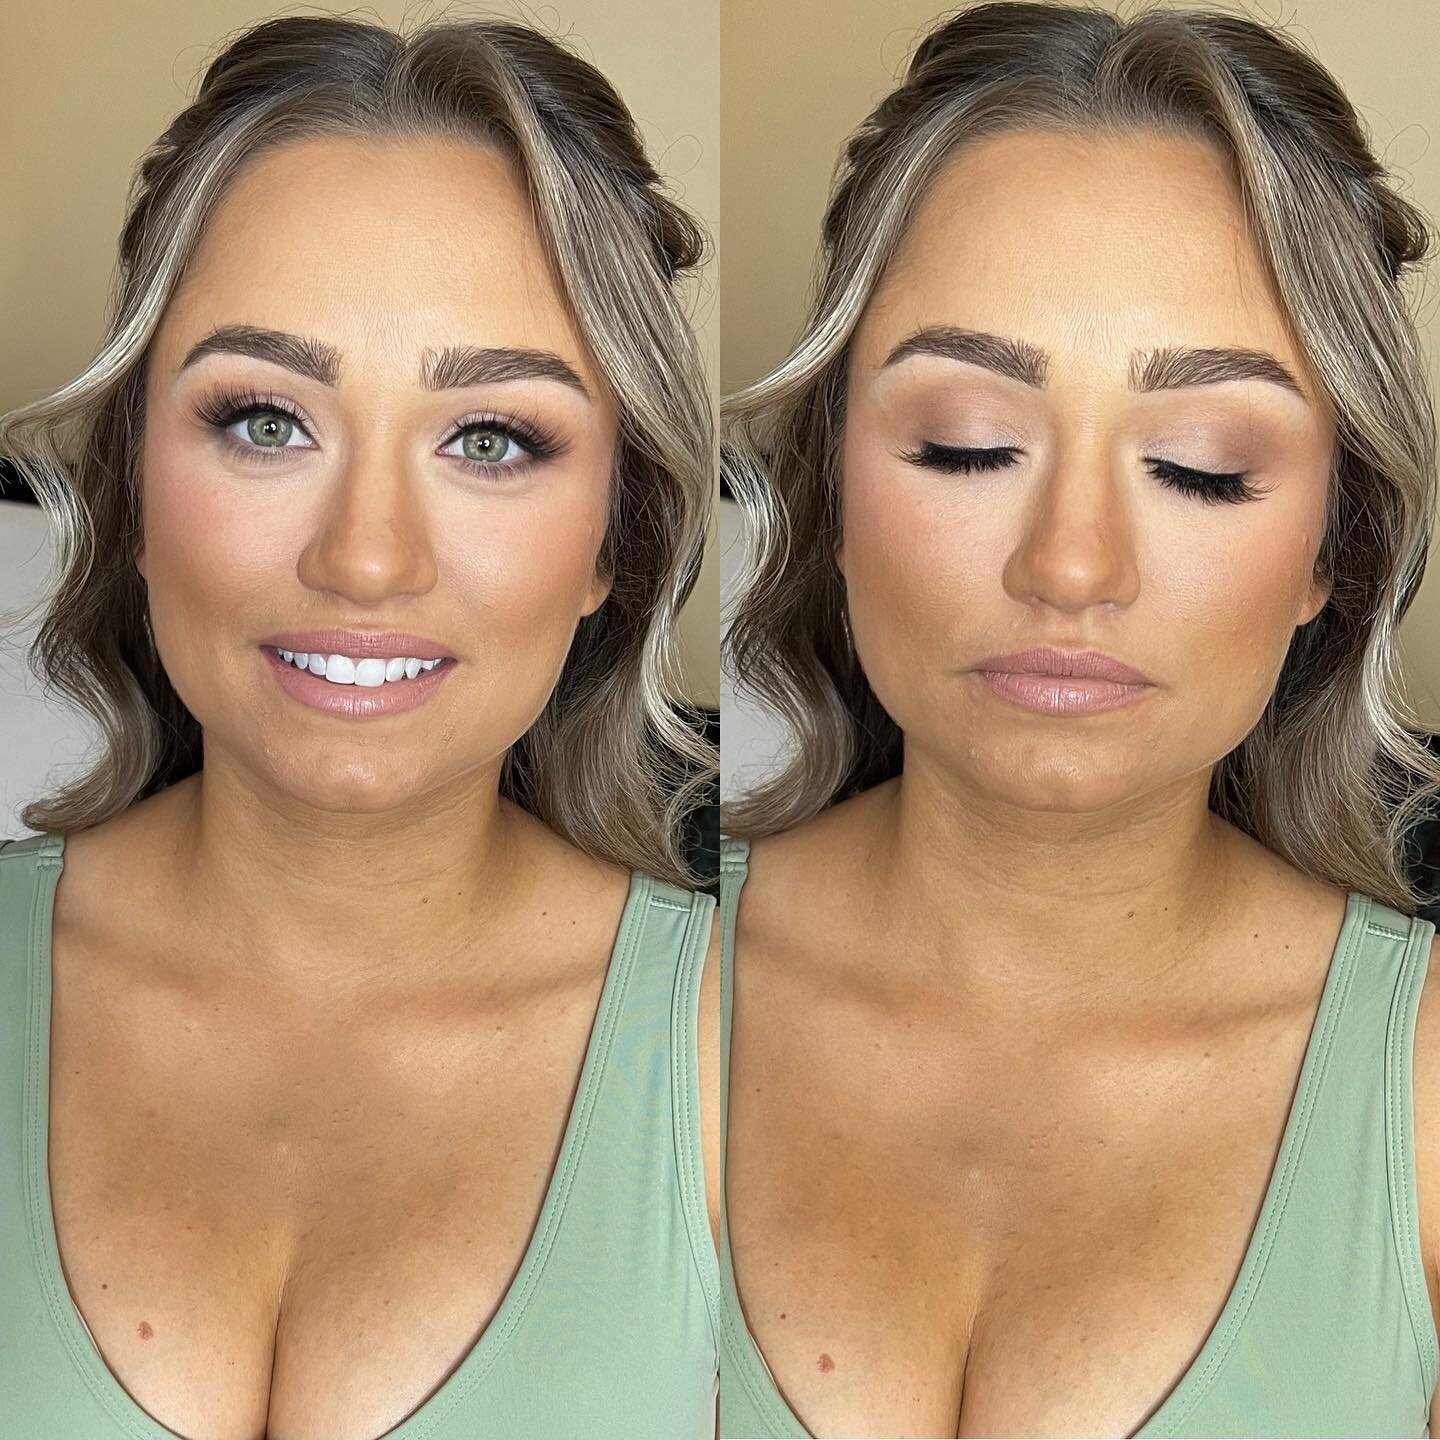 Hair and makeup glam on this momma-to-be!
🩷
~Traditional Hair | Detailed Makeup w/Airbrush &amp; Lashes~